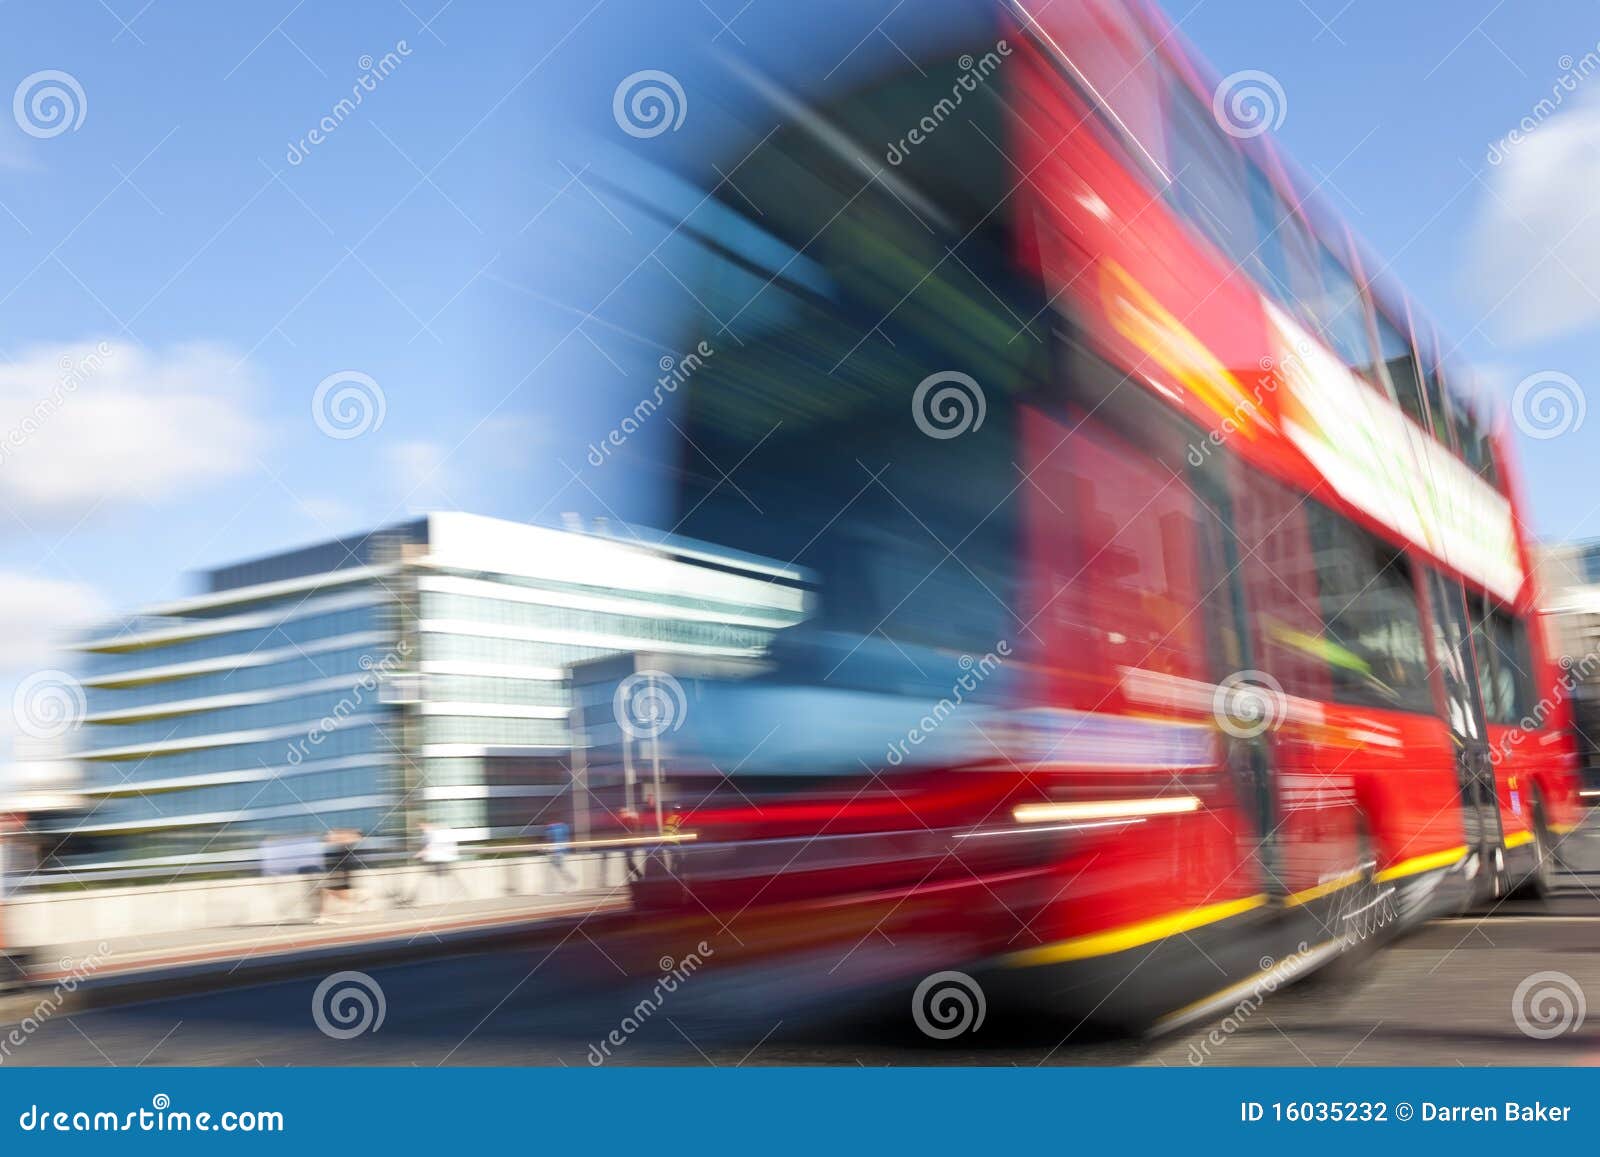 red london double decker bus motion blurred